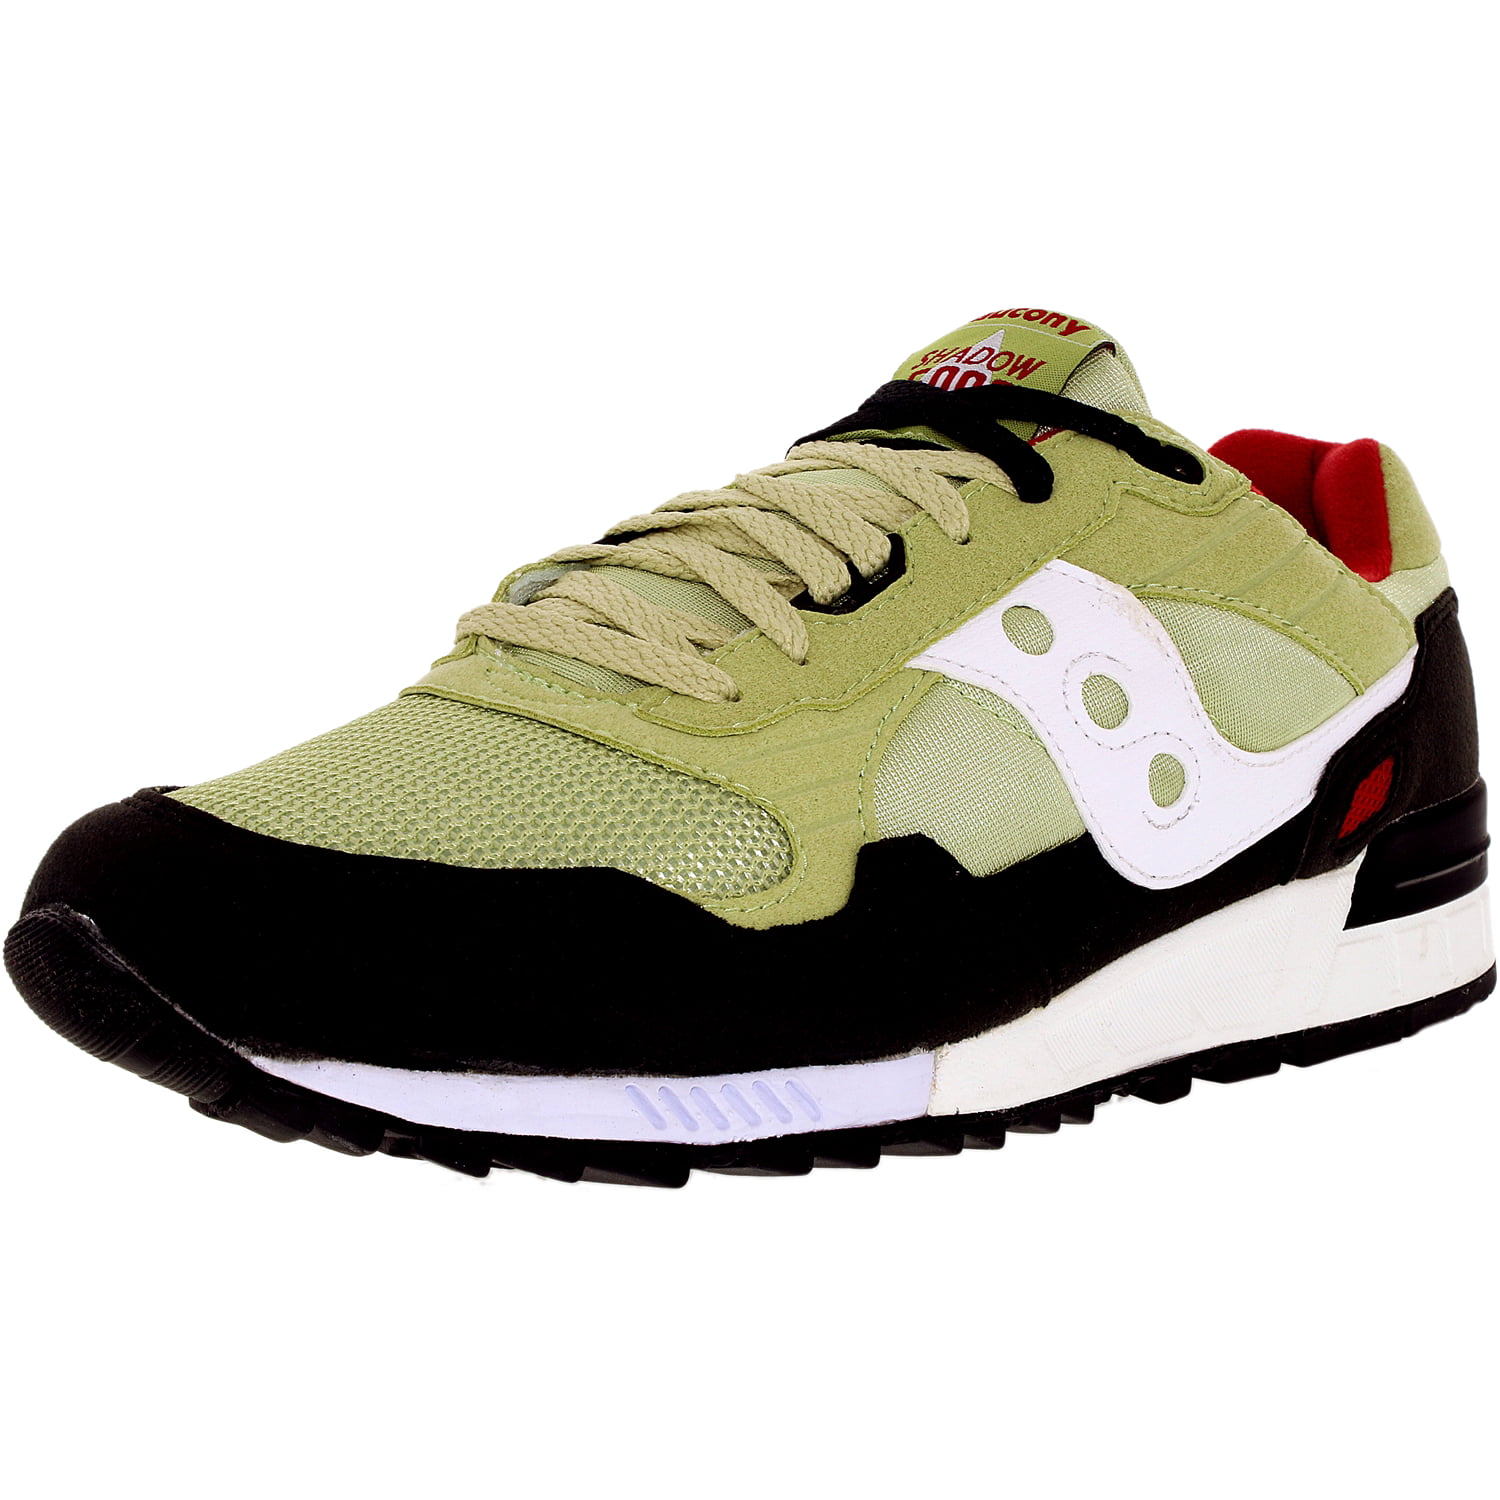 Saucony - Saucony Women's Shadow 5000 Ankle-High Leather Fashion ...